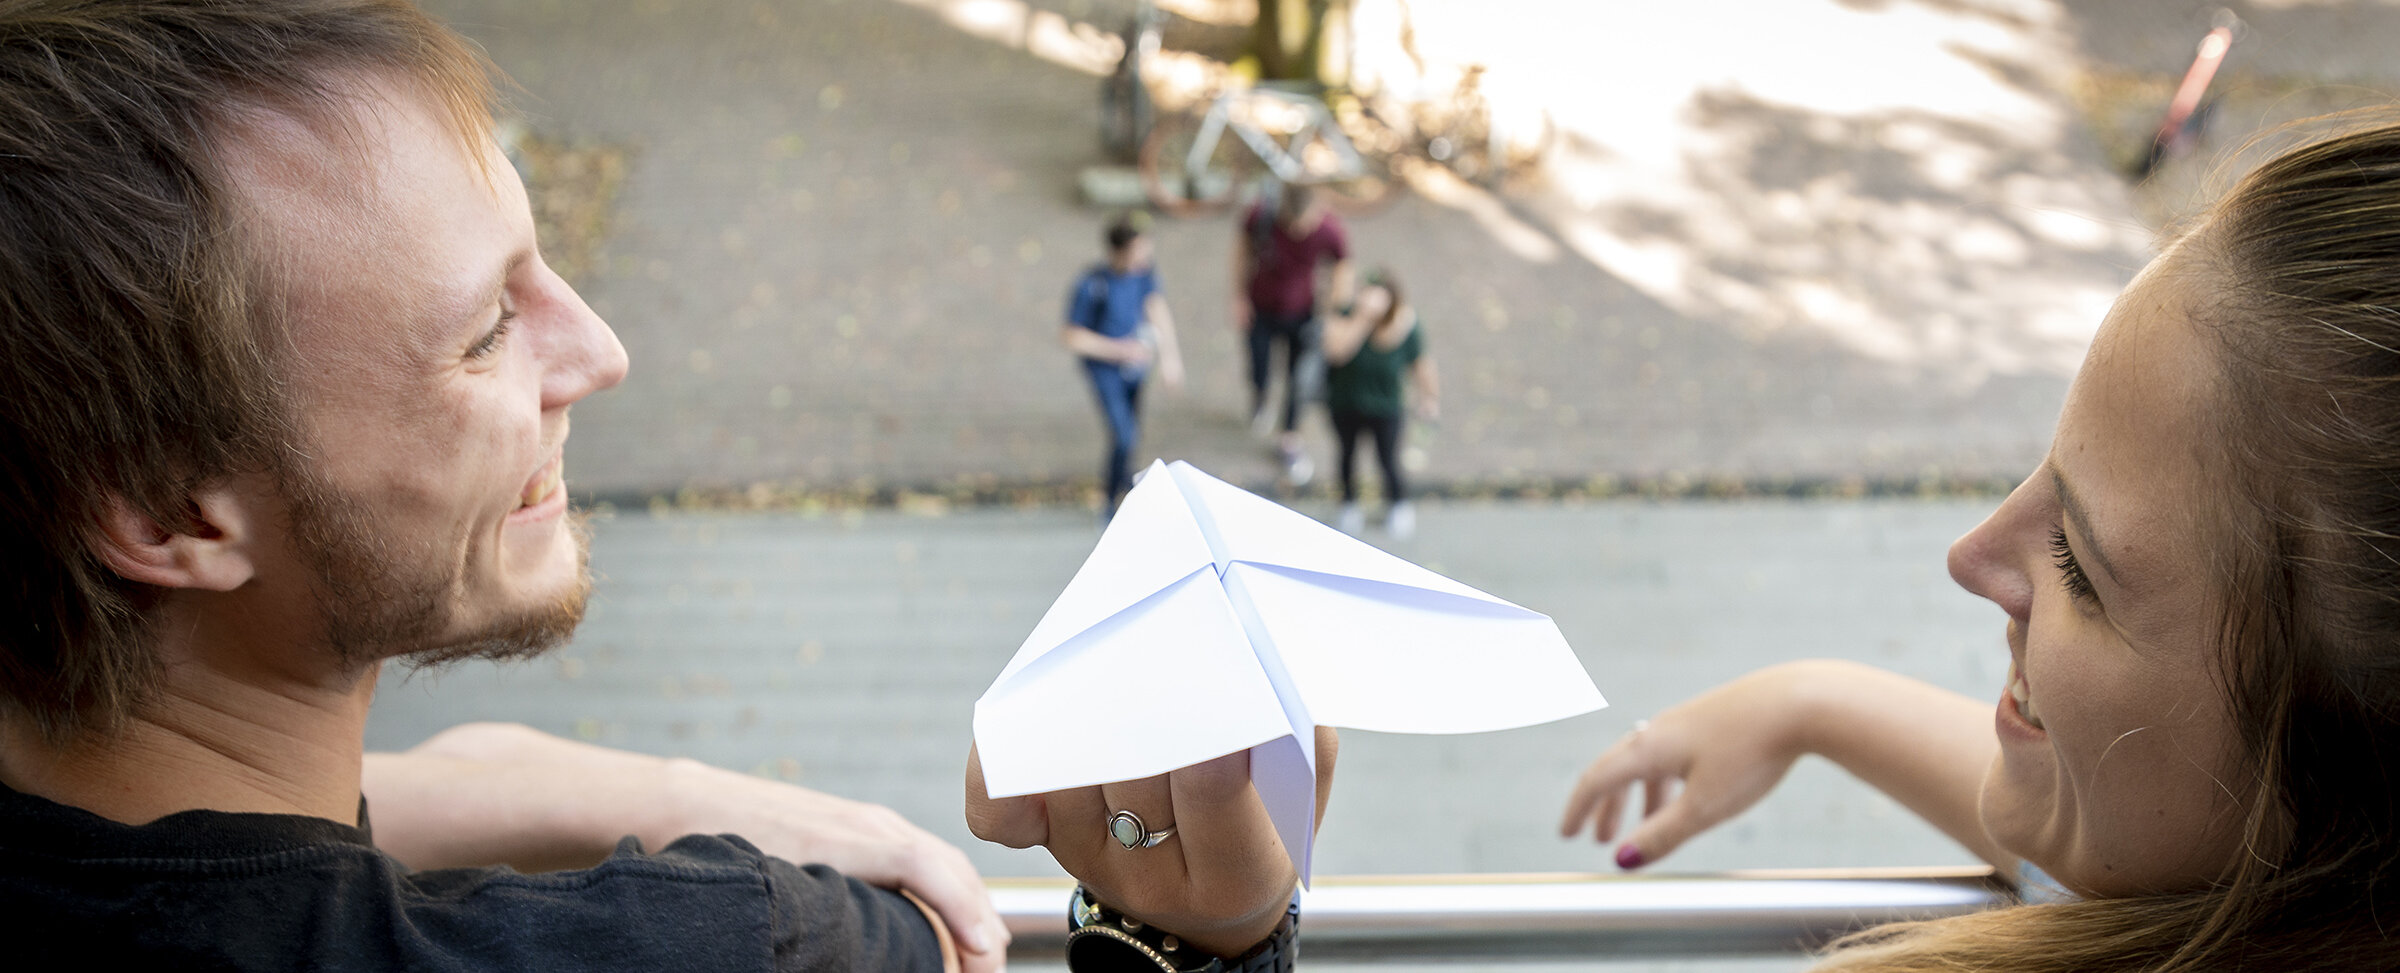 two students on a balcony, about to let fly a paper plane